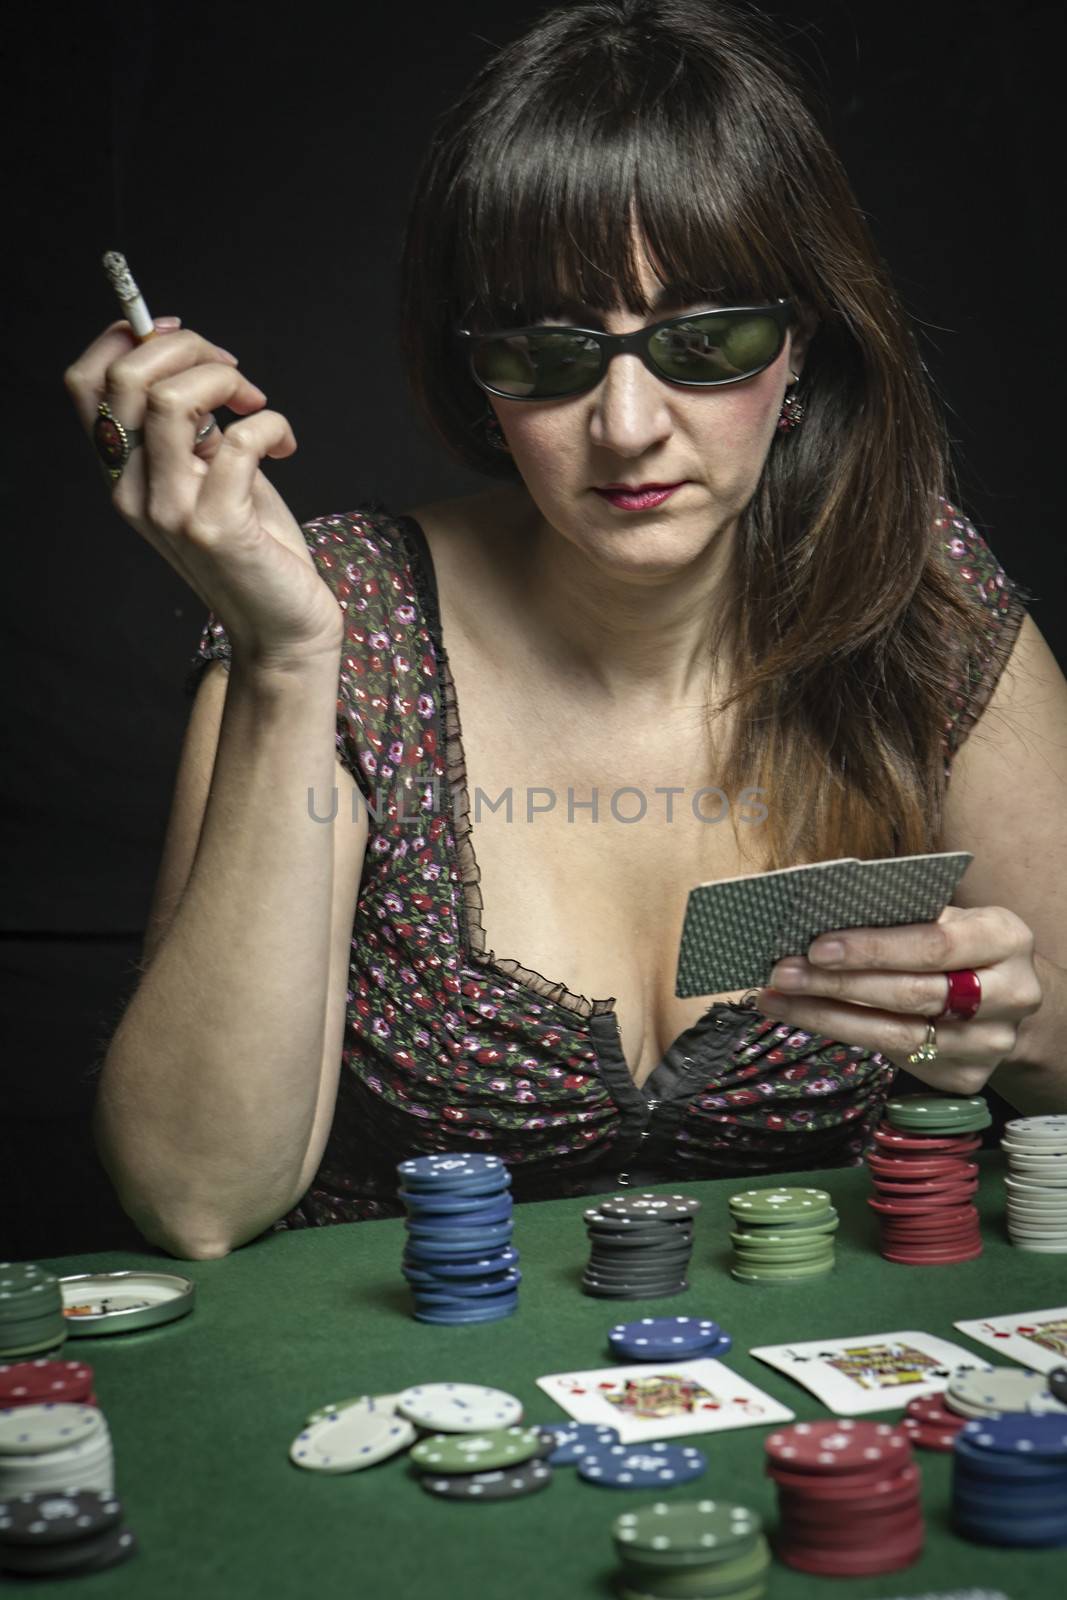 Sexy Woman with cigarette and sunglasses bet in a poker game